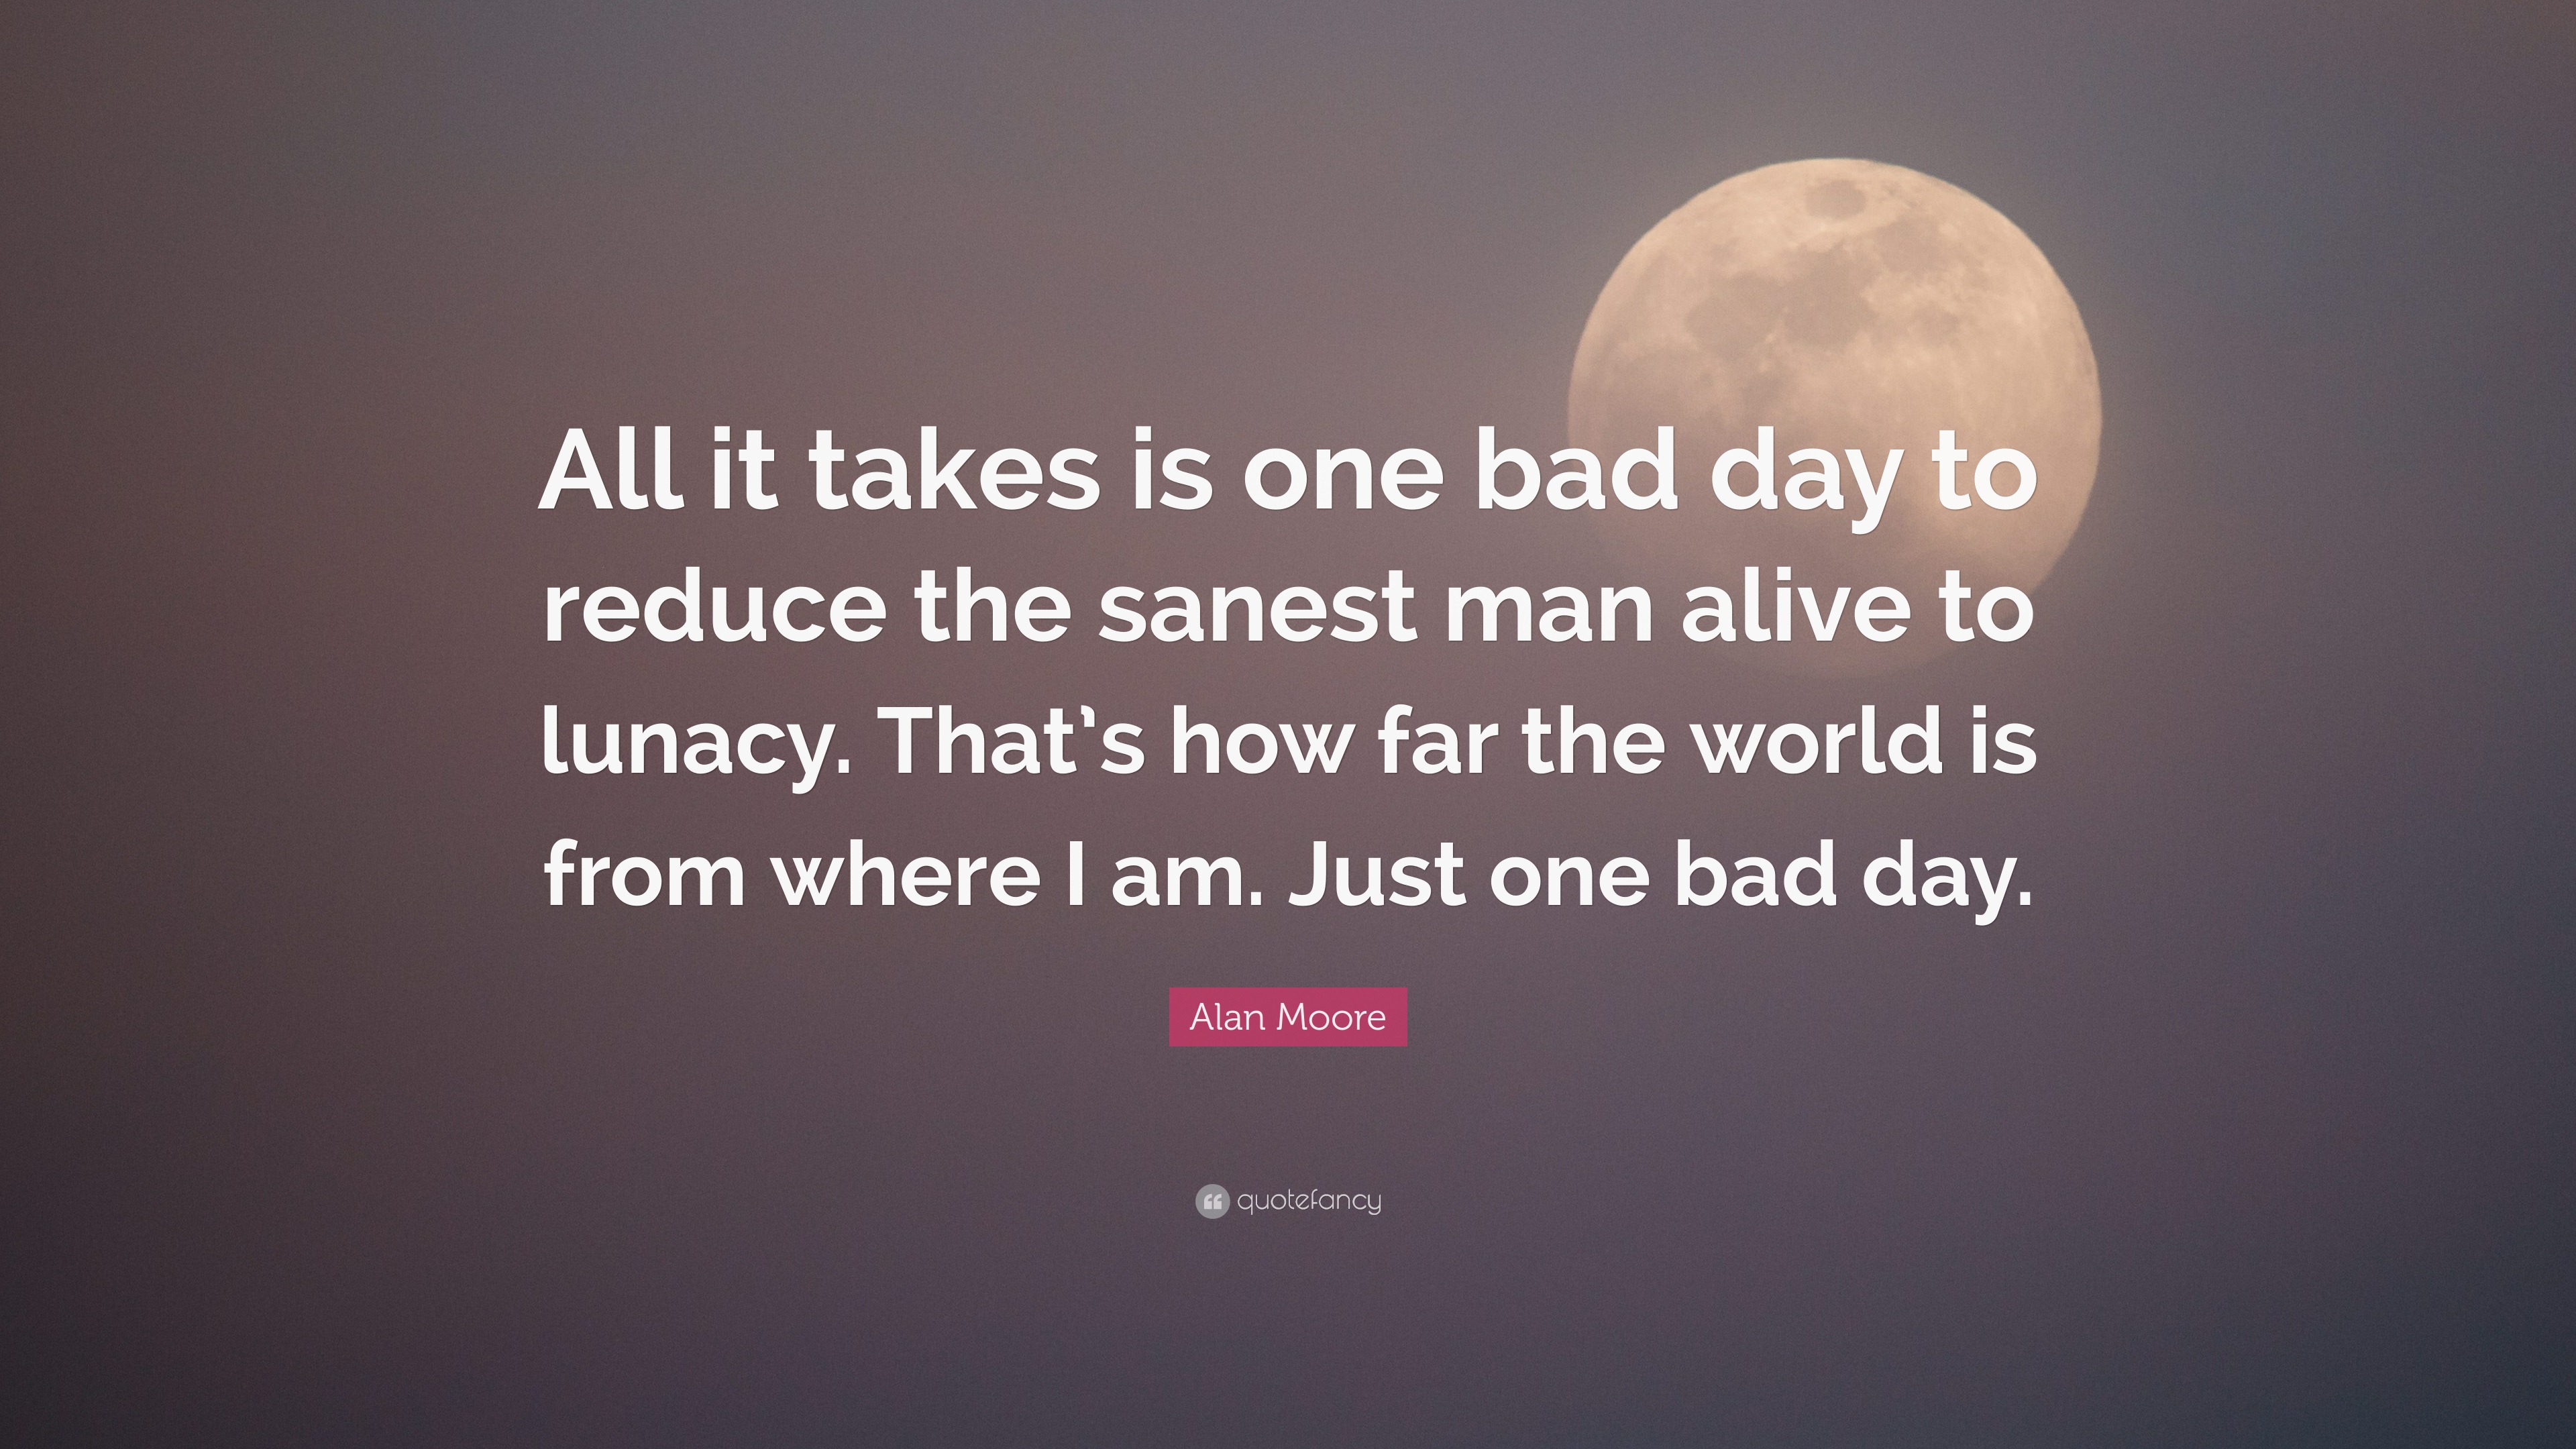 Alan Moore Quote All It Takes Is One Bad Day To Reduce The Sanest Man Alive To Lunacy That S How Far The World Is From Where I Am Just